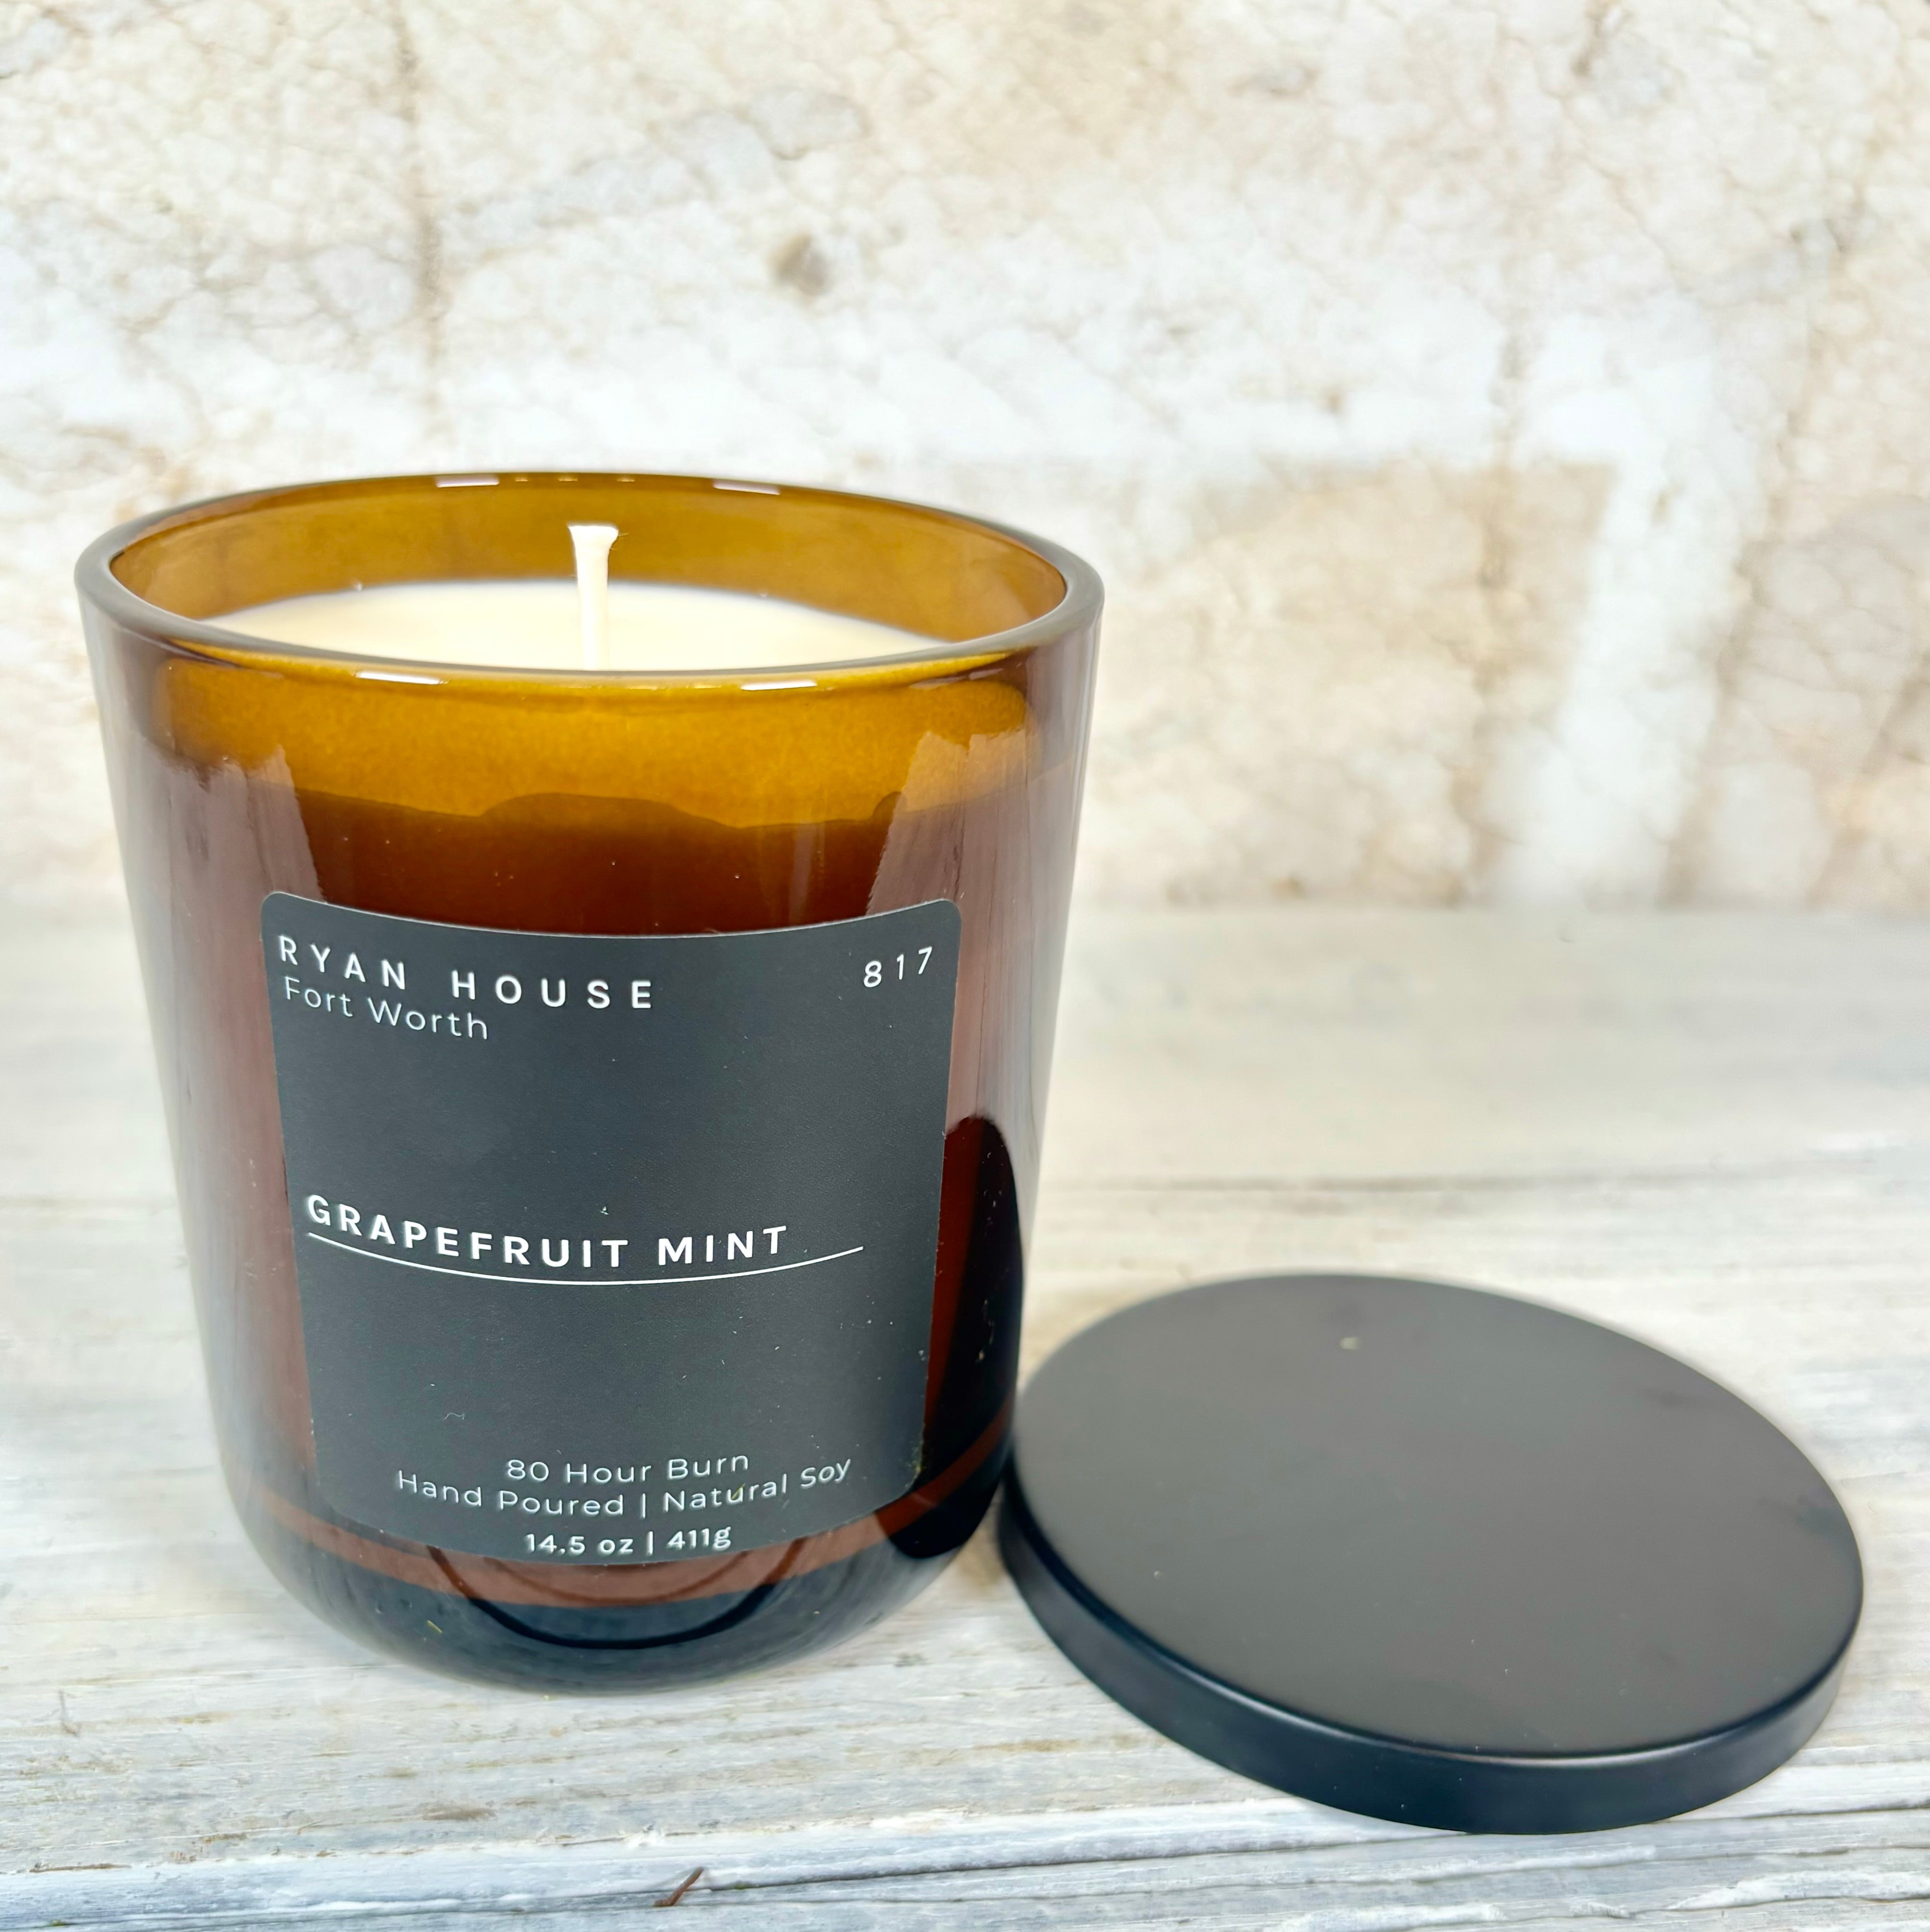 Hand Poured Grapefruit Mint Candle